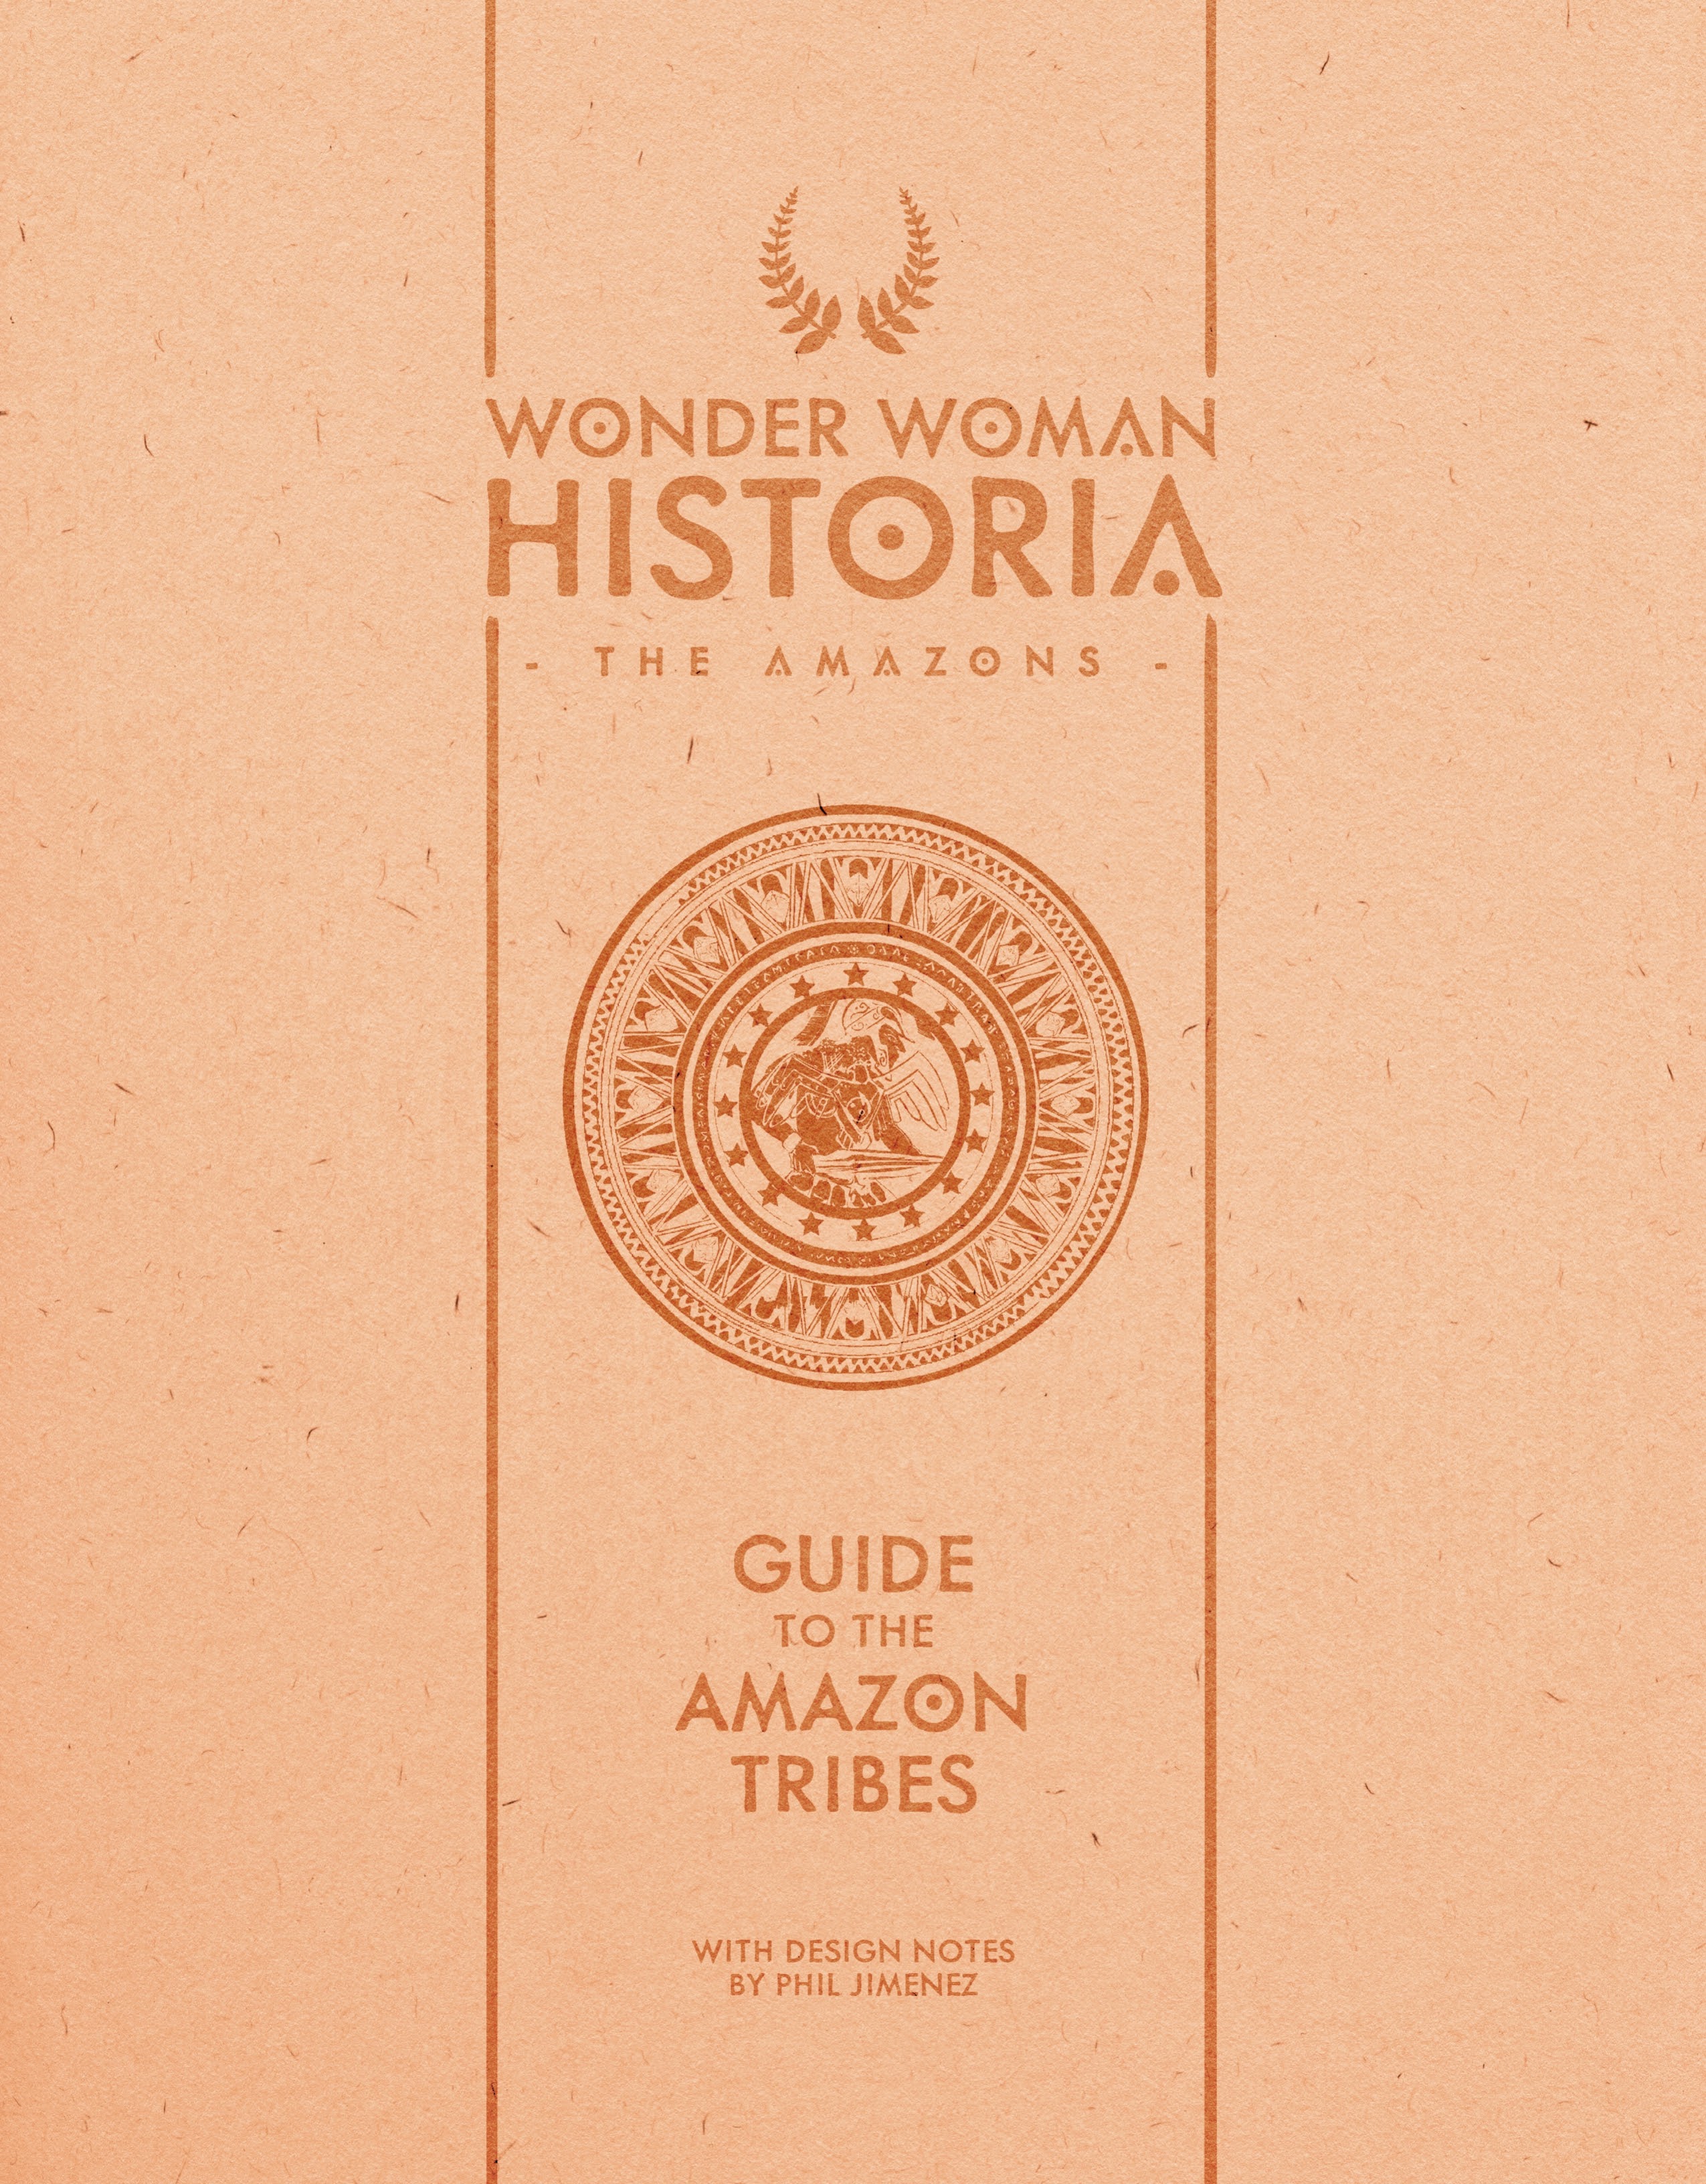 Read online Wonder Woman Historia: The Amazons comic -  Issue #1 - 45